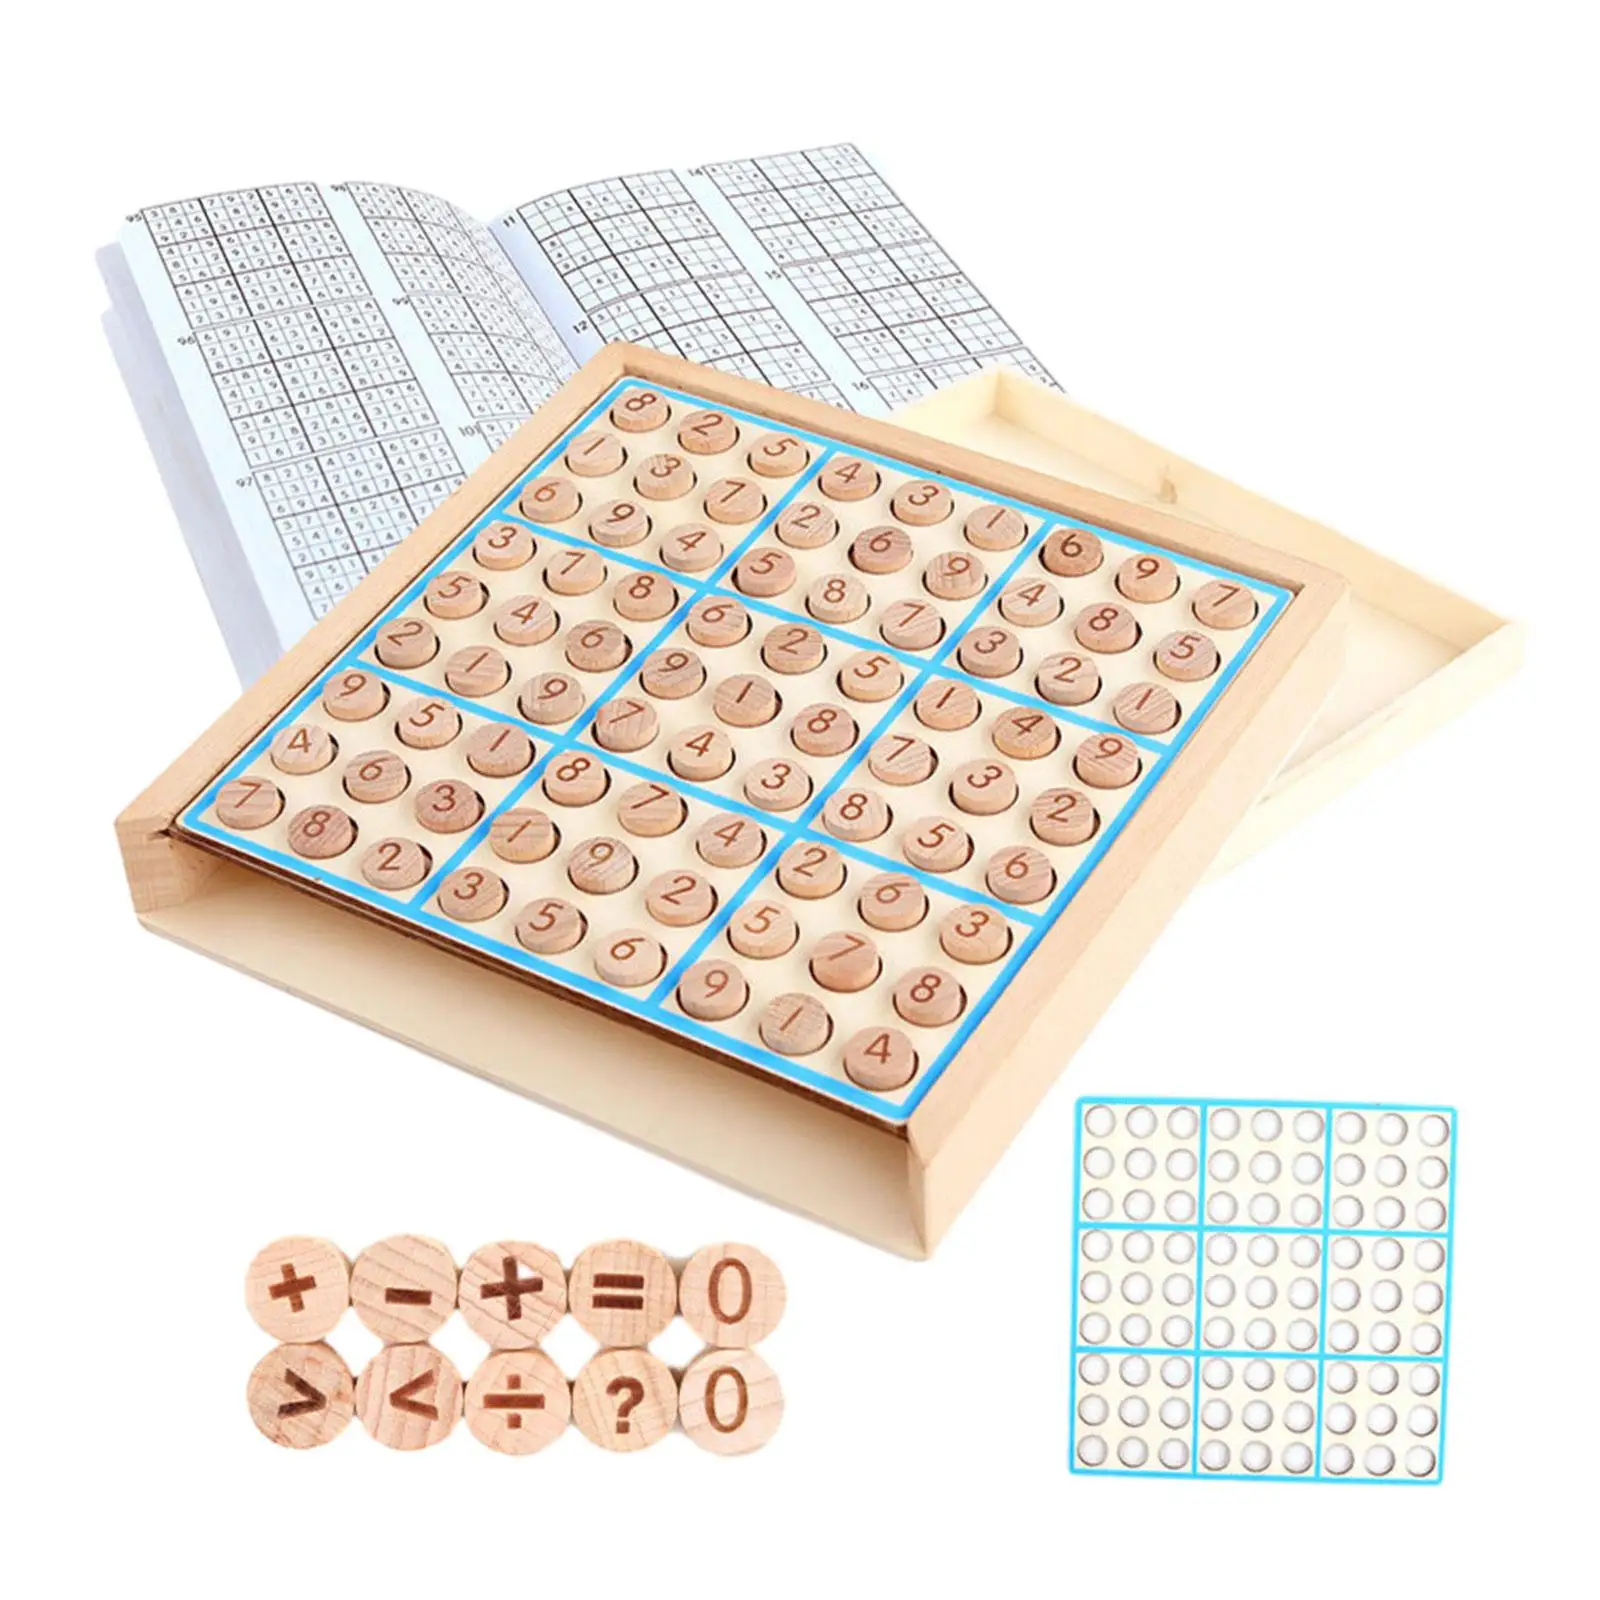 Wooden Sudoku Board Portable Sudoku Chess Toy Number Thinking Game Train Logical